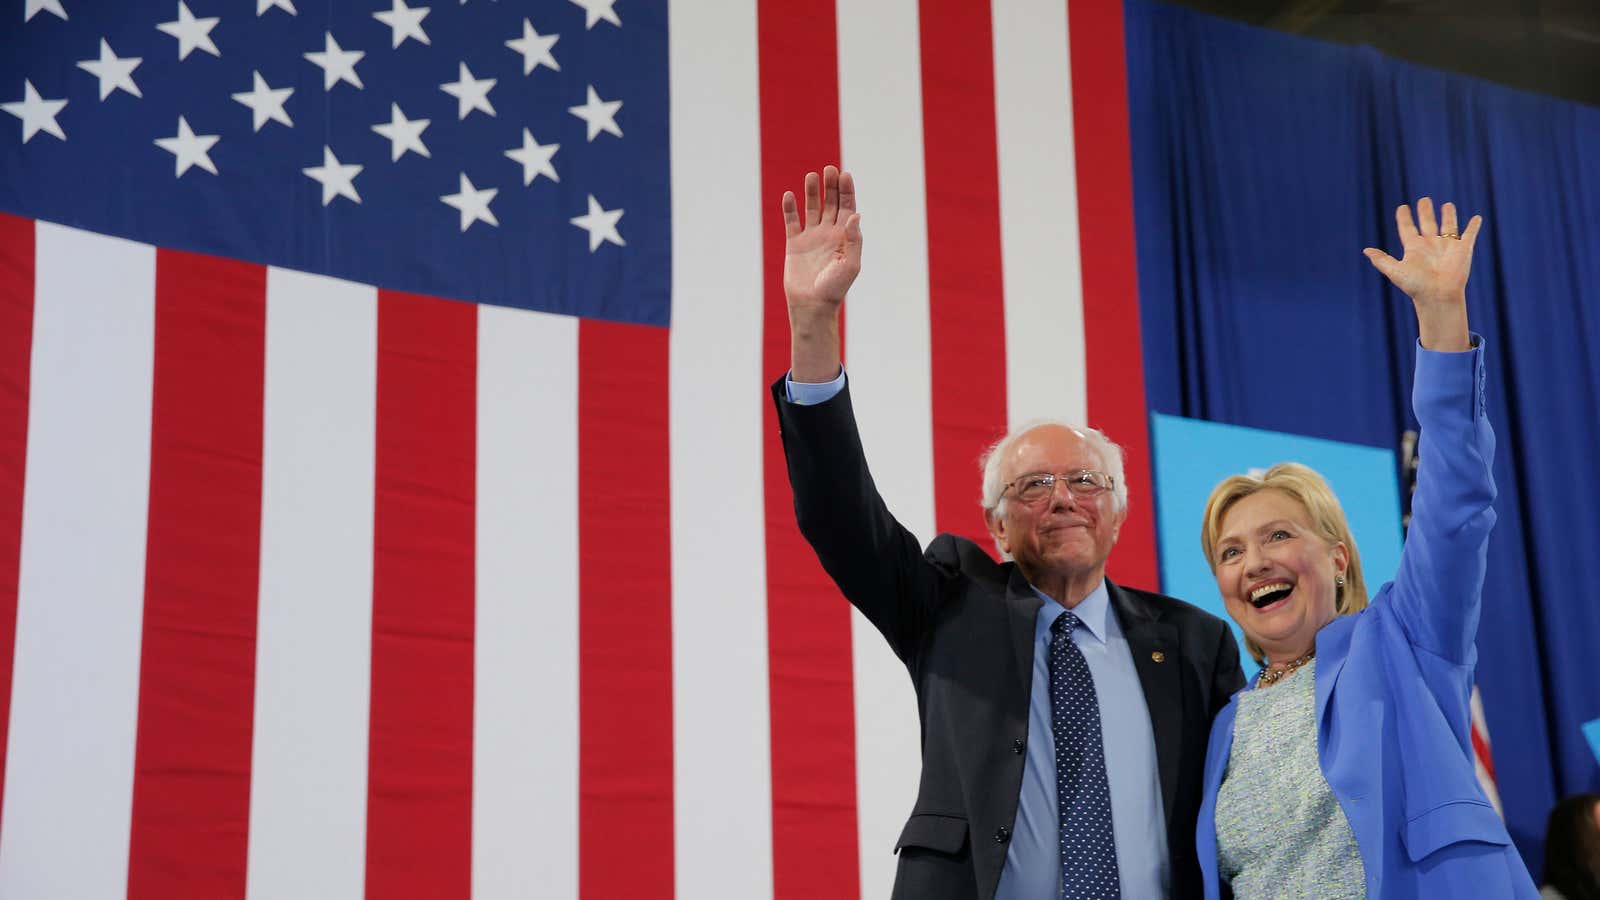 Democratic candidates Hillary Clinton (right), the presumptive nominee, and Bernie Sanders (left).